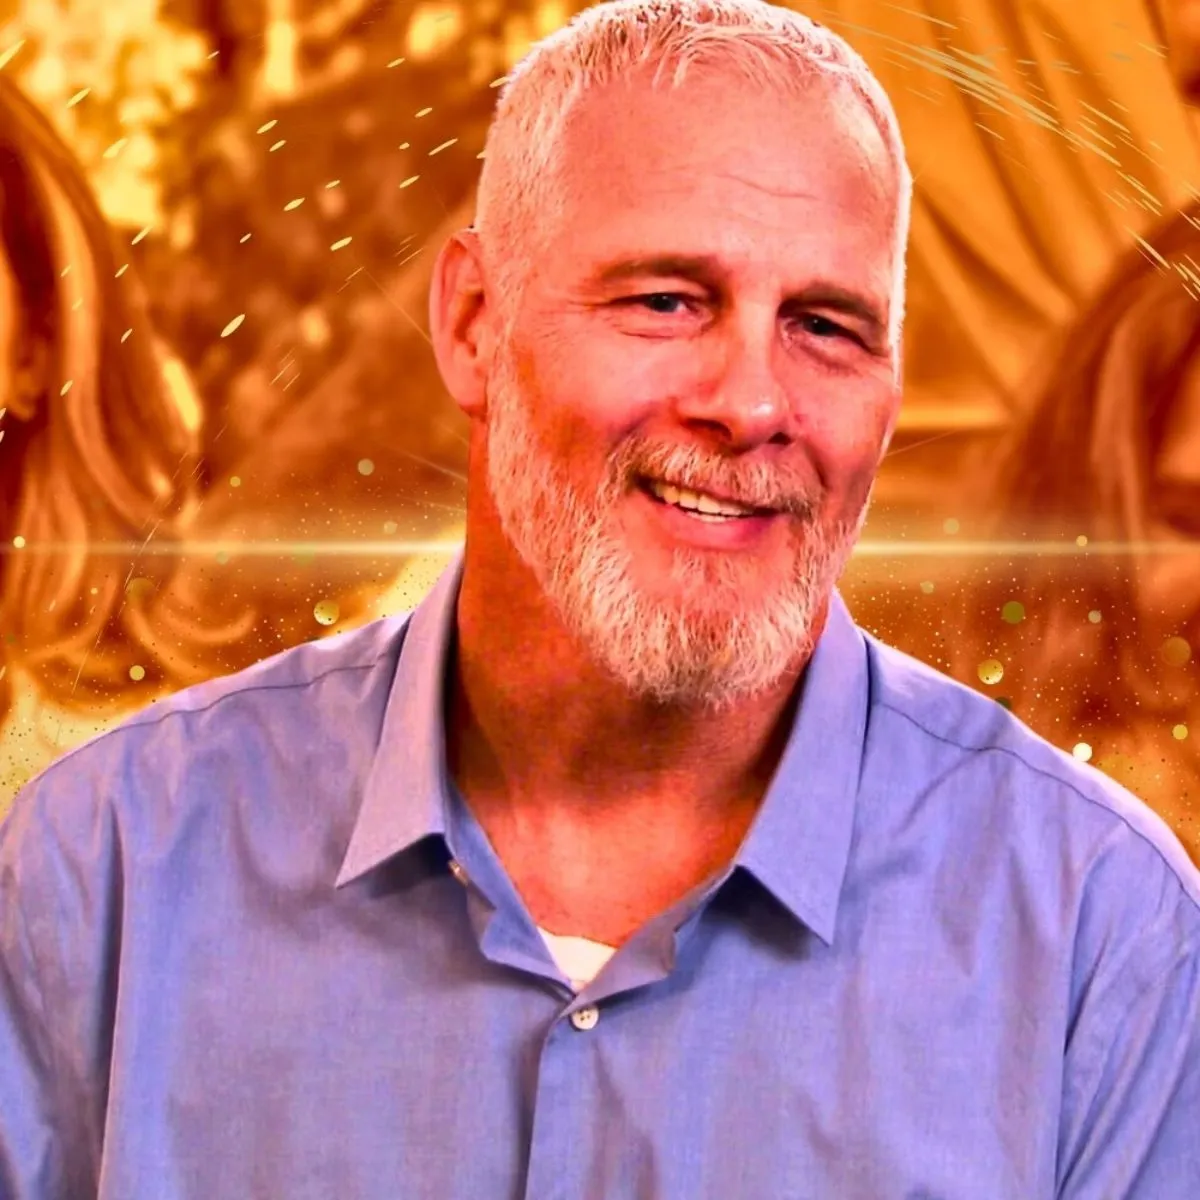 Kelsey Anderson's Dad Mark Fuels Golden Bachelorette Rumors Amid Brand-New Instagram Clues